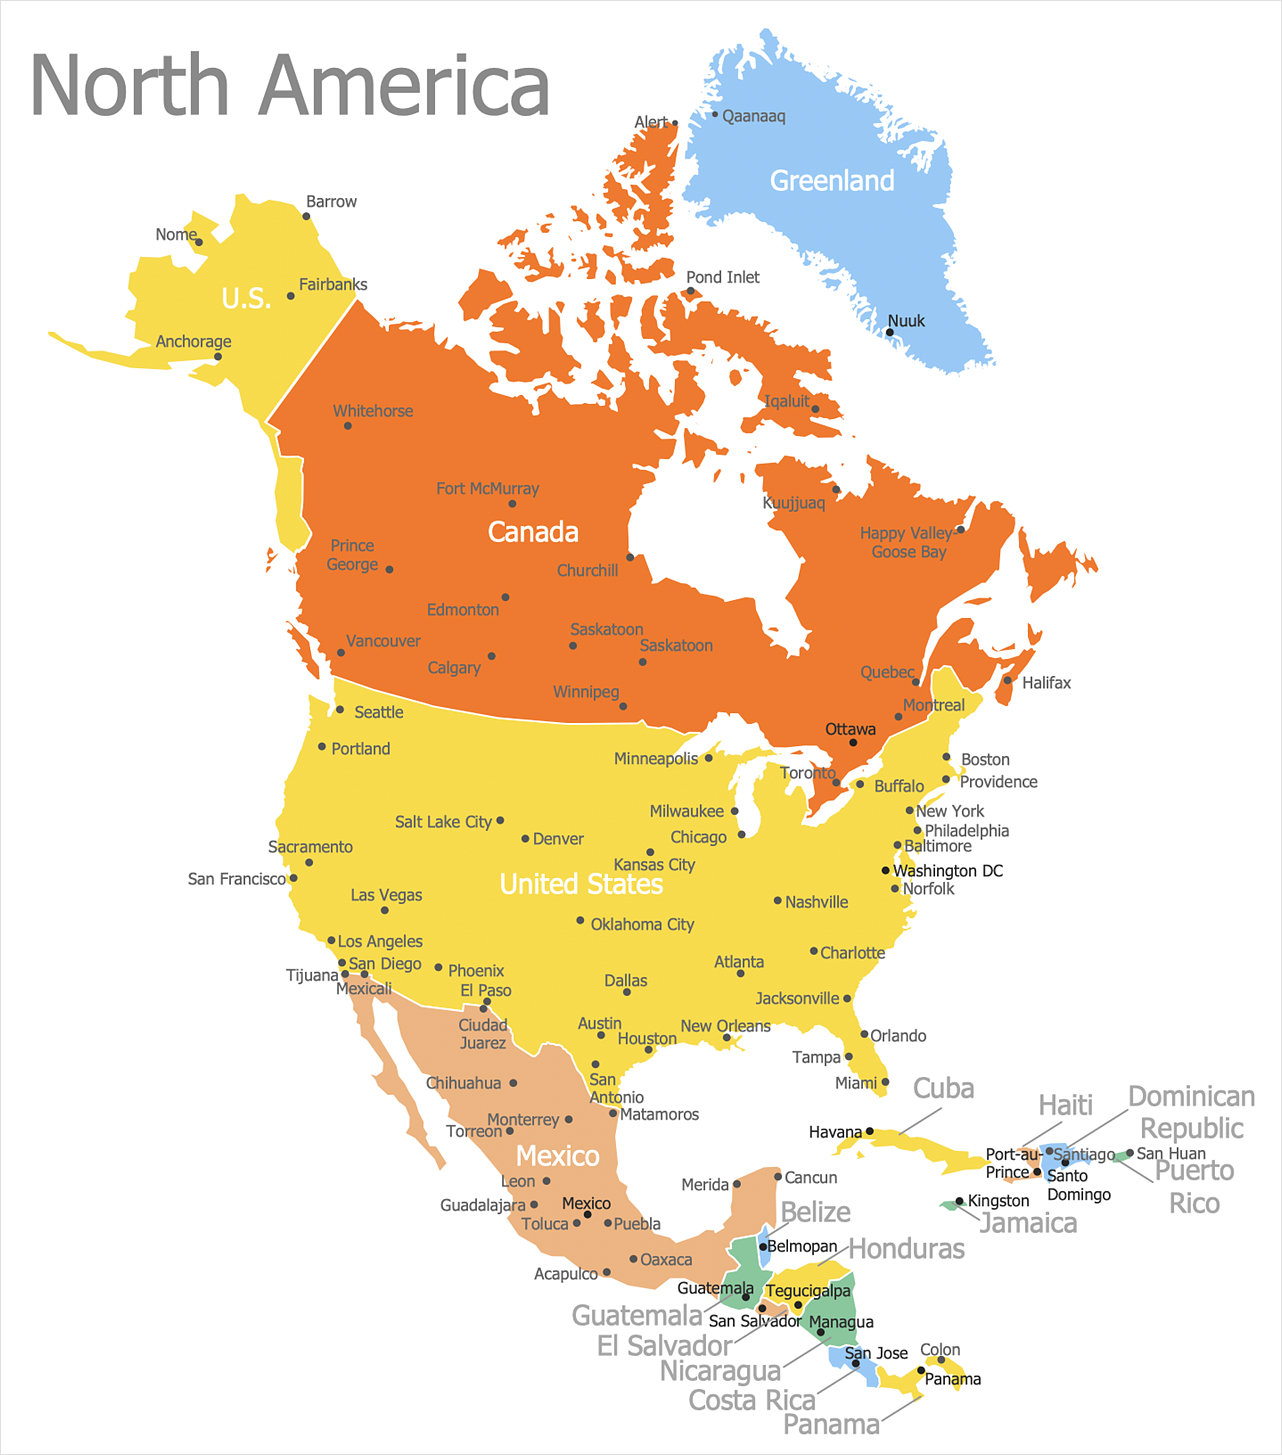 How to Draw a Map of North America